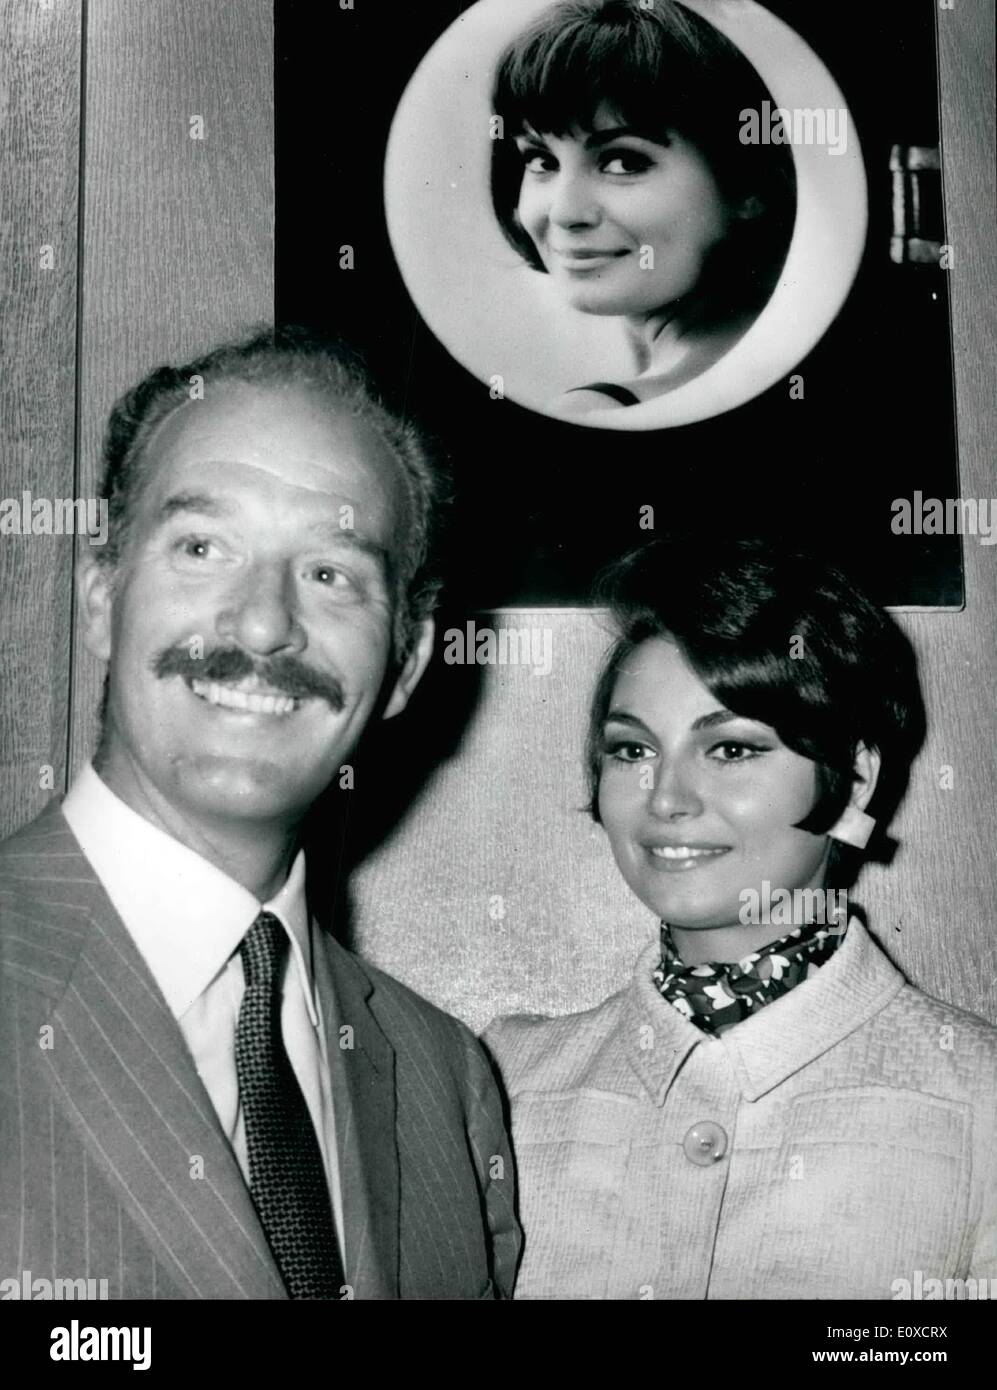 Jun. 06, 1966 - Italian screen star Rosanna Schiaffino and her husband Alfredo Bini, producer of many films, hold a press conference to belie their separation. A Roman newspaper wrote the notice. Photo shows Rossana Schiaffino and her husband Alfredo Bini. Stock Photo